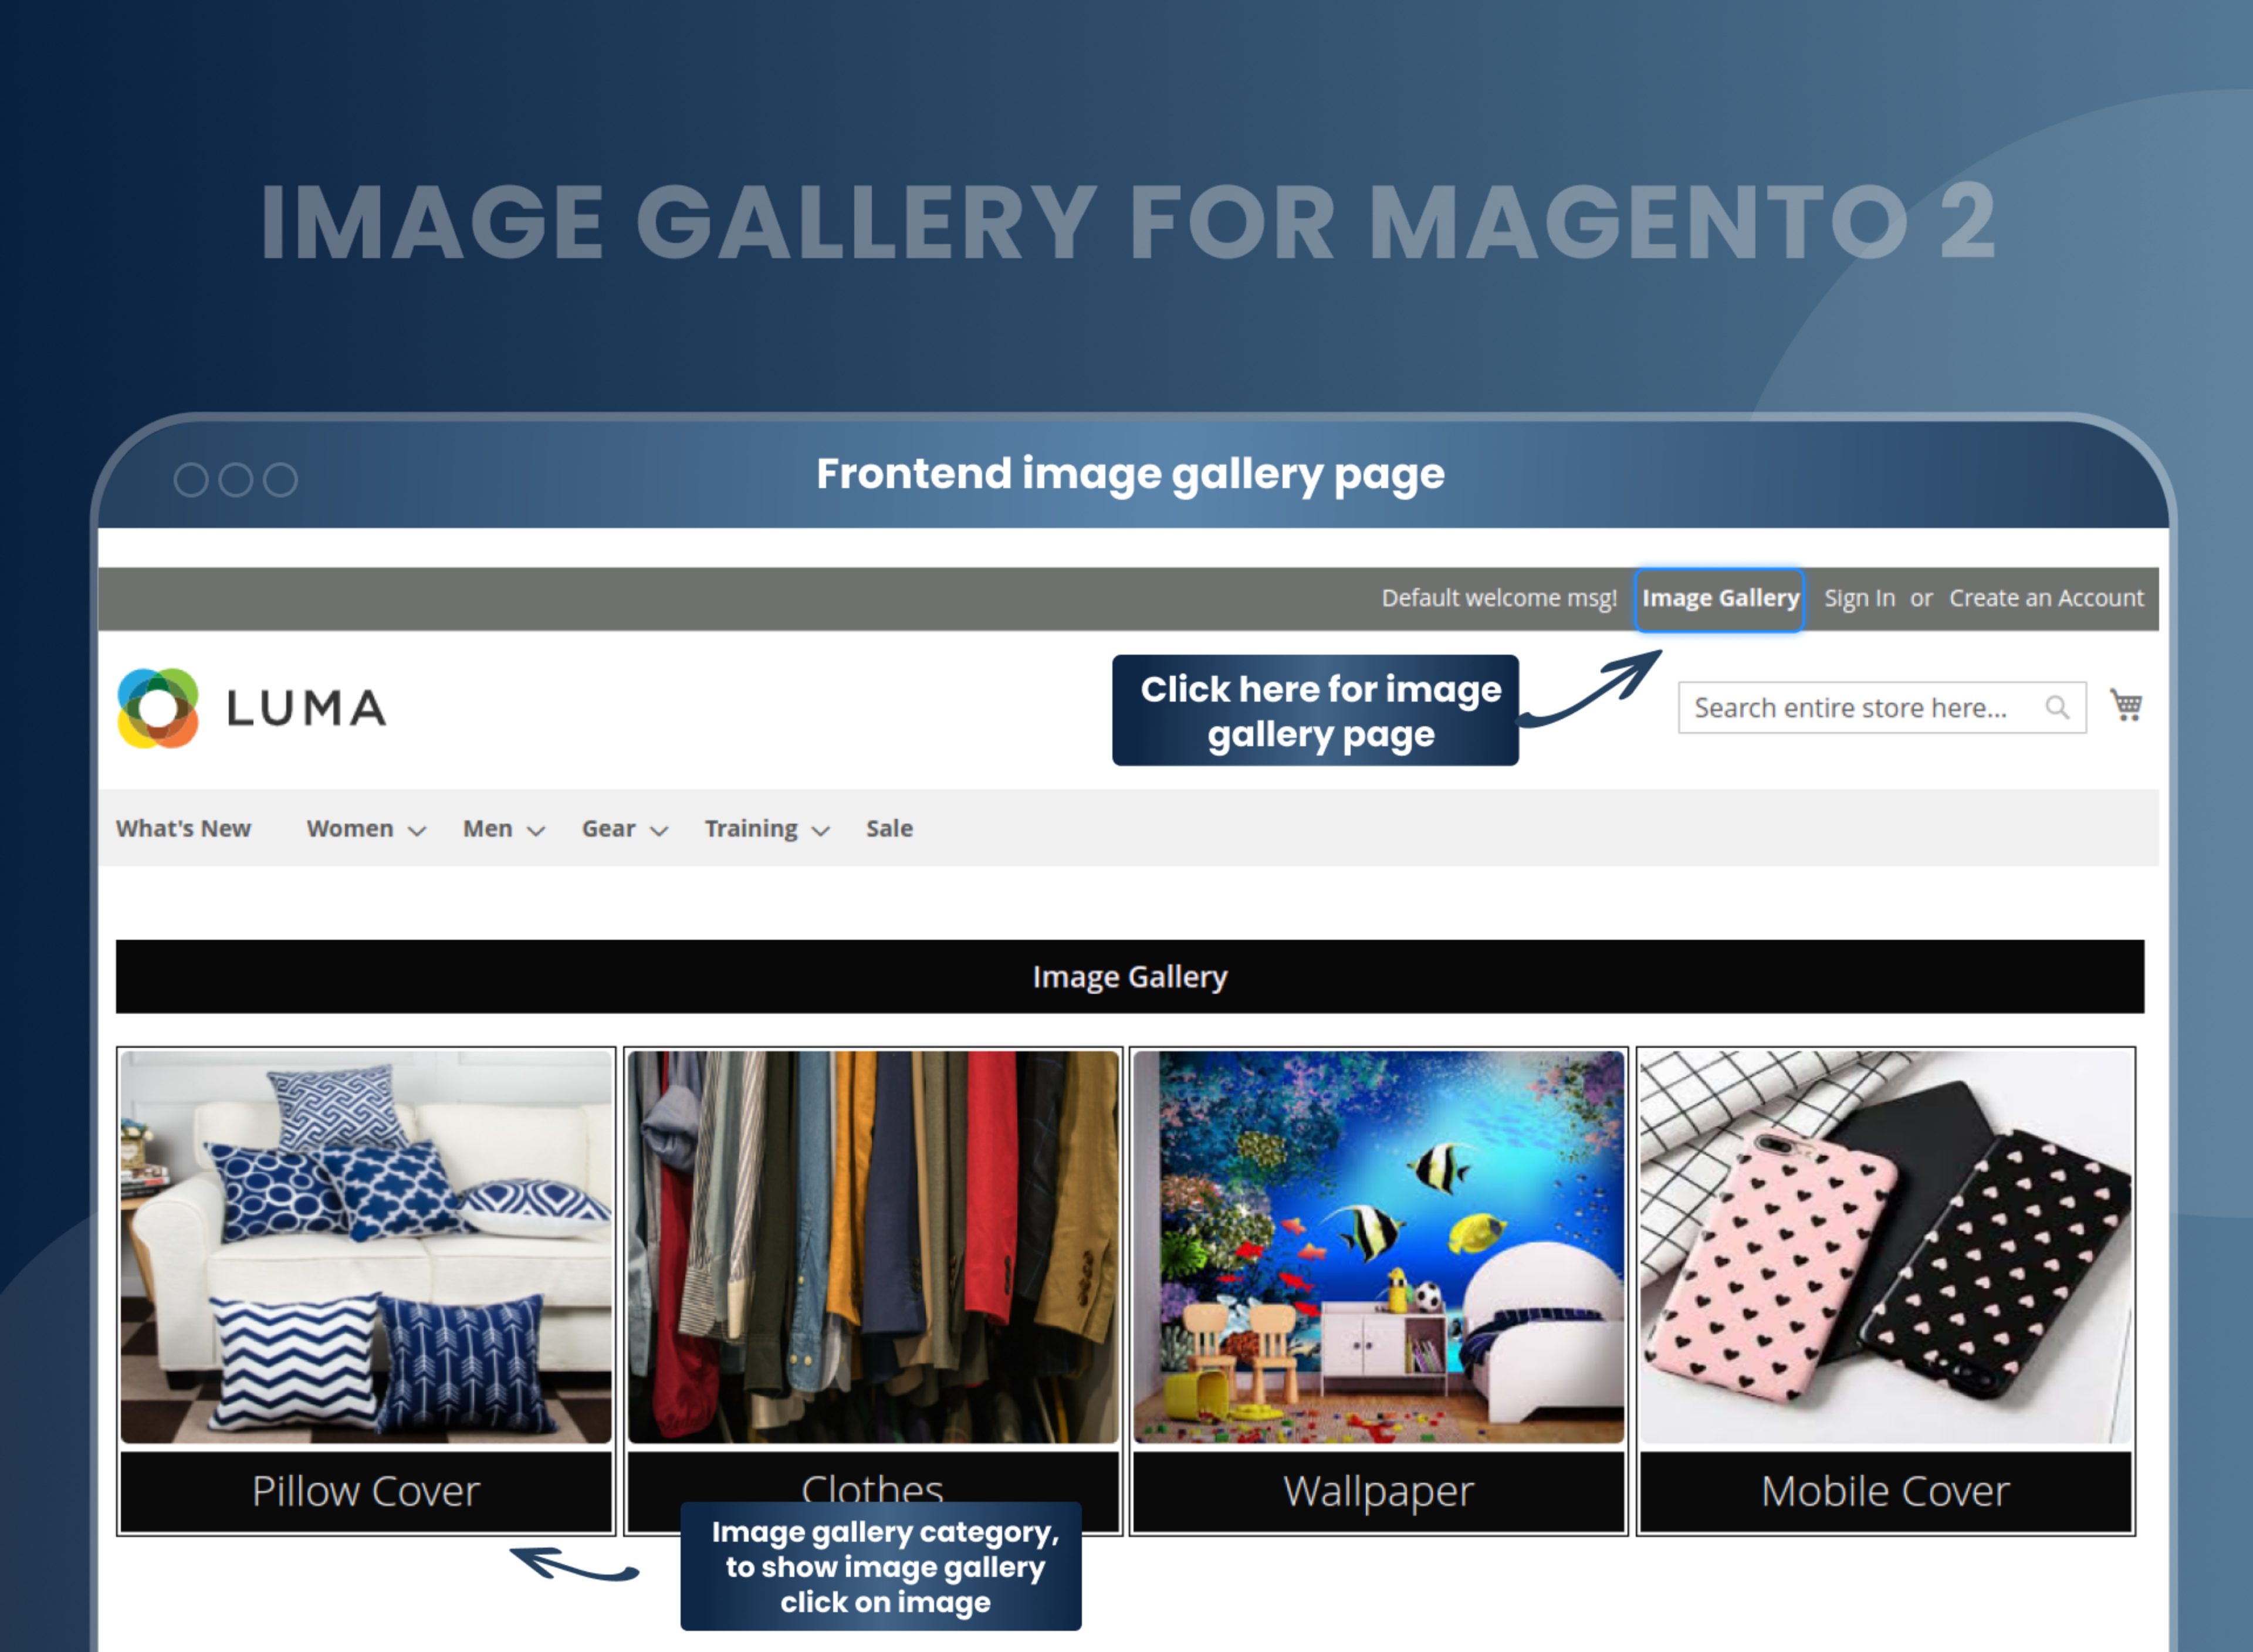 Frontend image gallery page